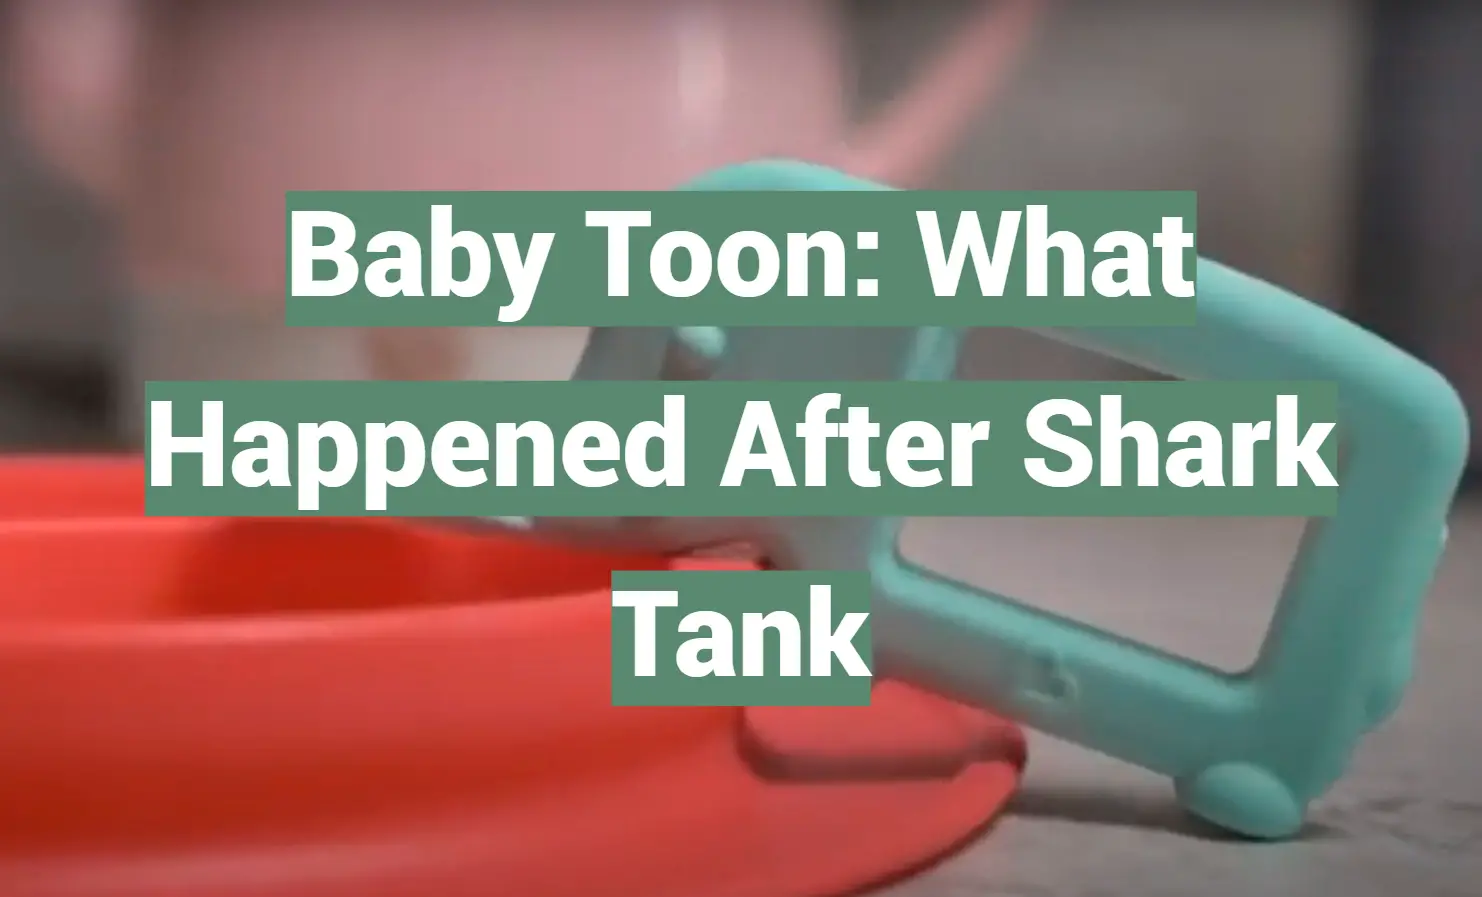 Baby Toon: What Happened After Shark Tank